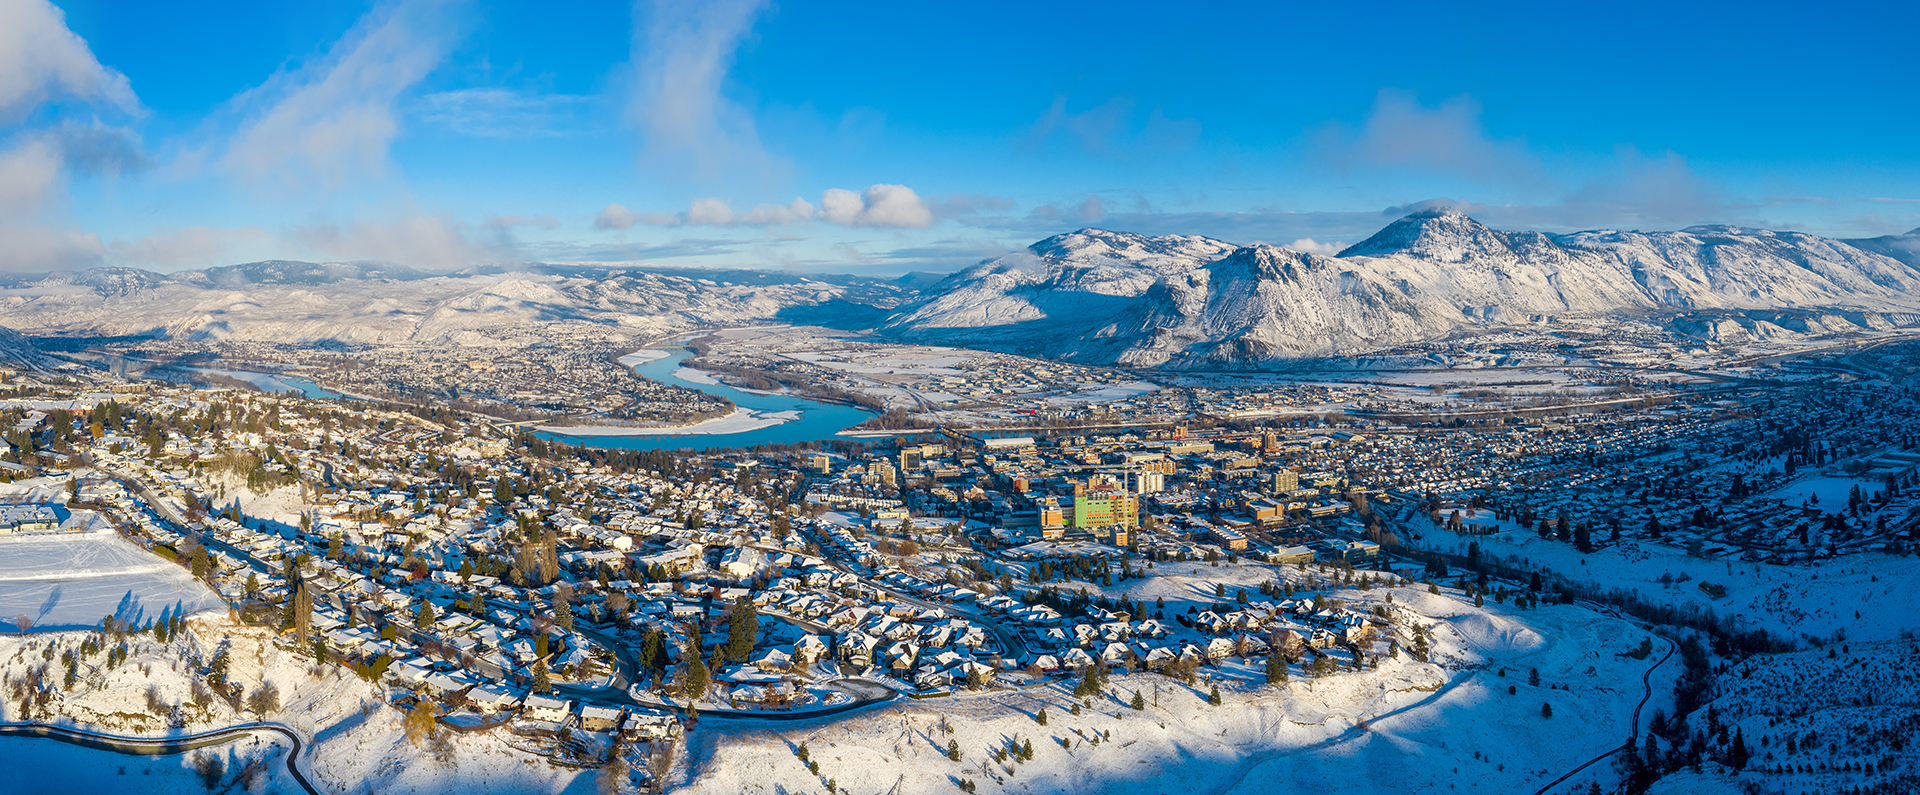 Kamloops City Aerial view with snow and mountains daytime